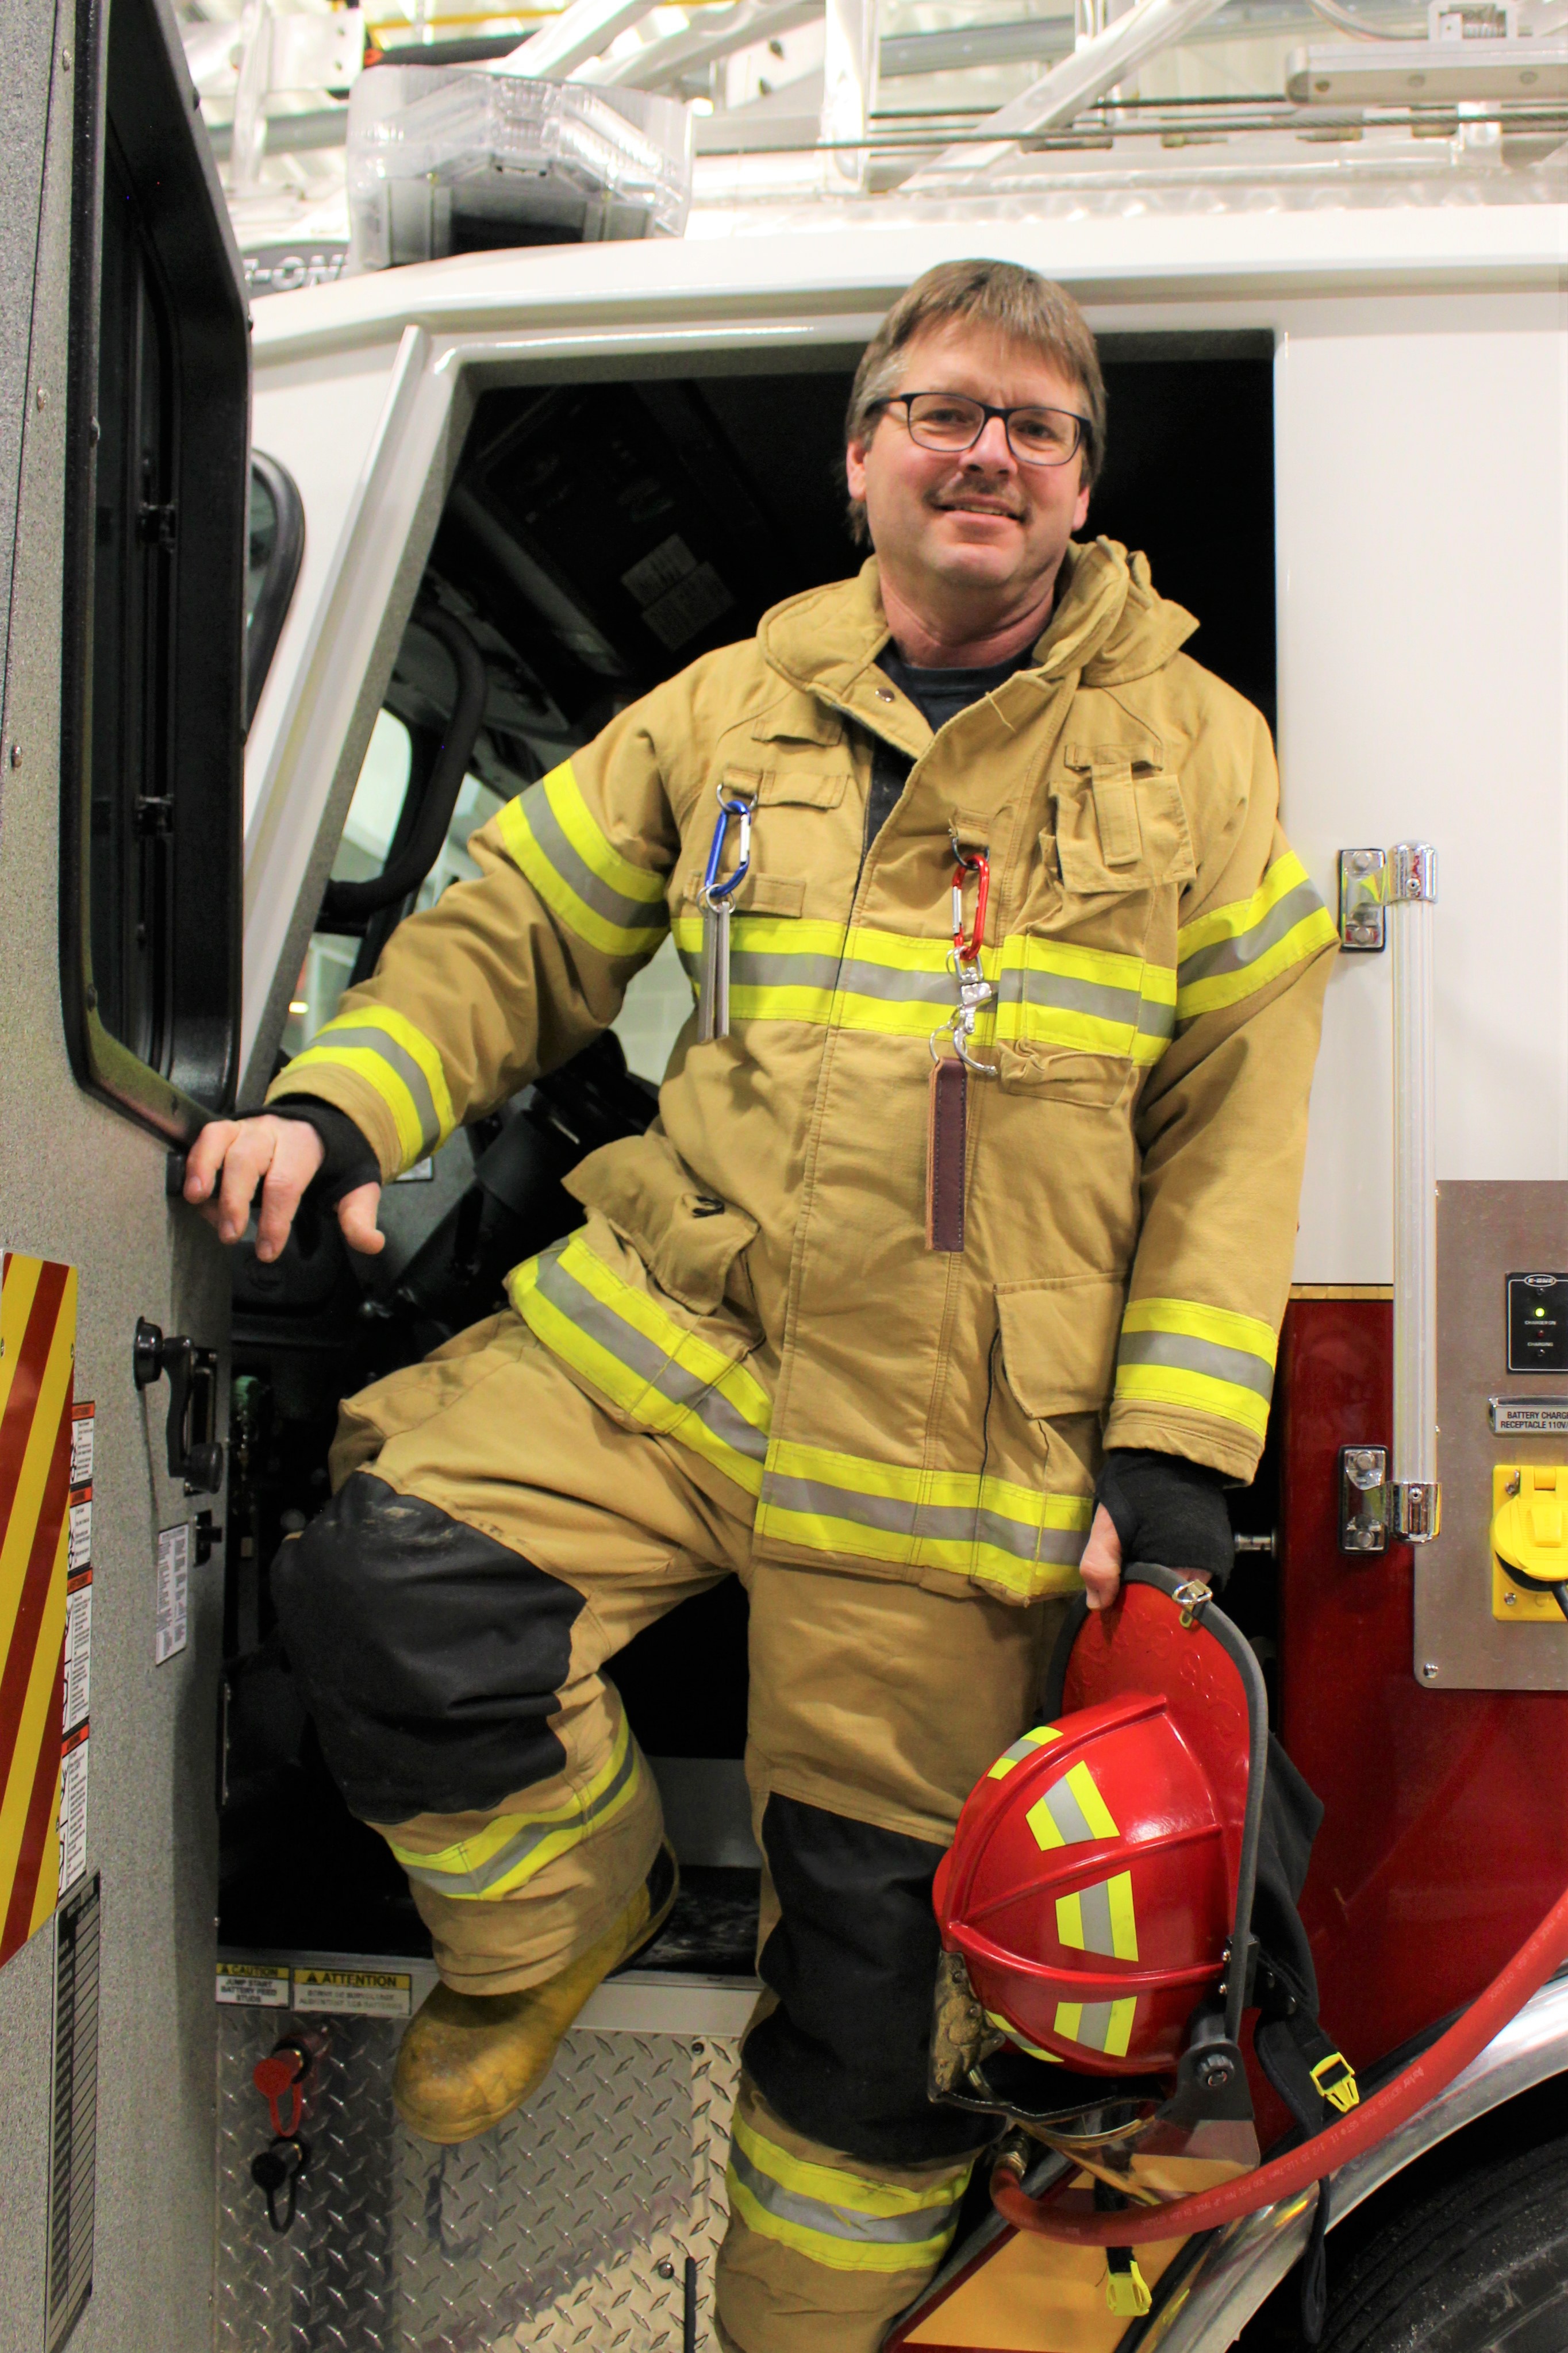 Captain Dale Robinson standing in door of a fire truck